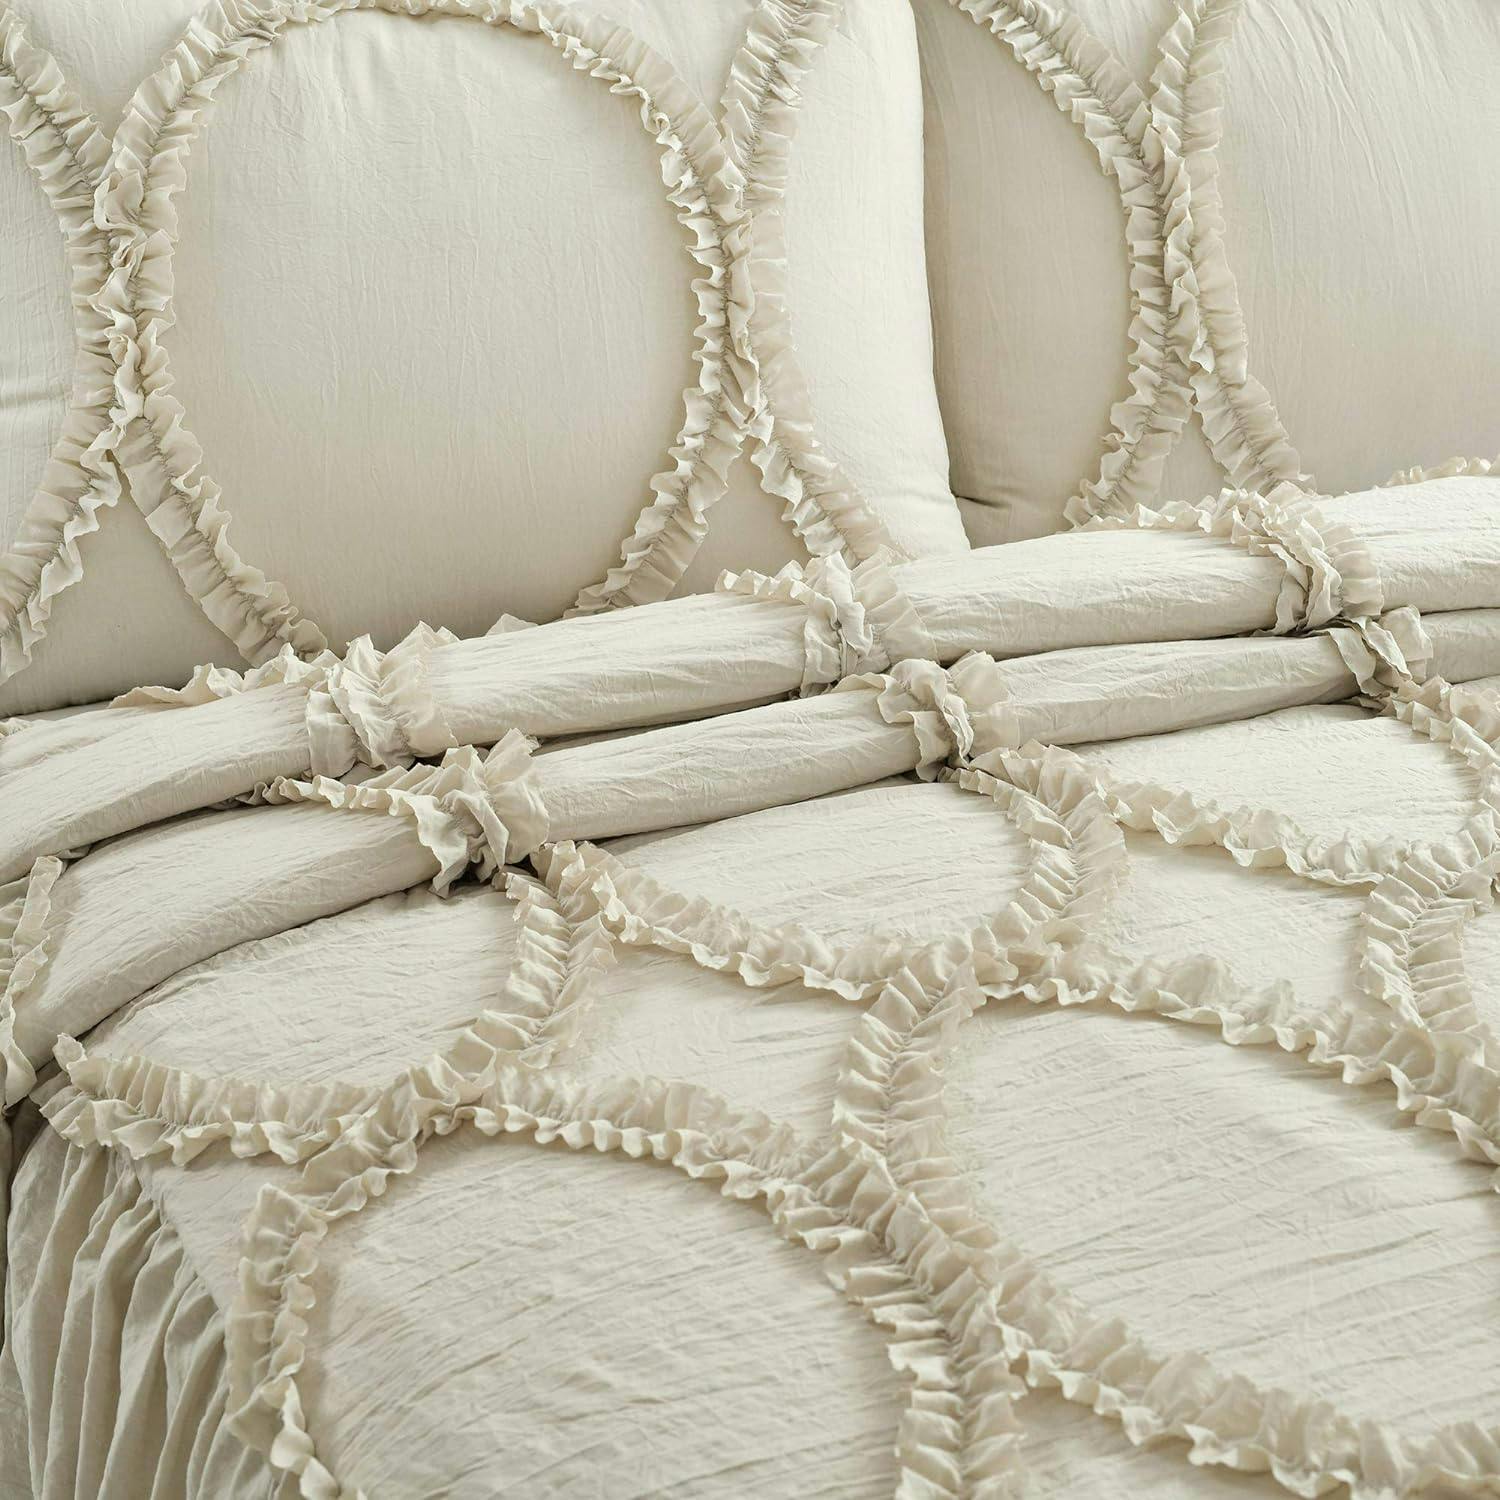 Elegant Neutral King Bedspread Set with Ruffled Ribbon Embroidery